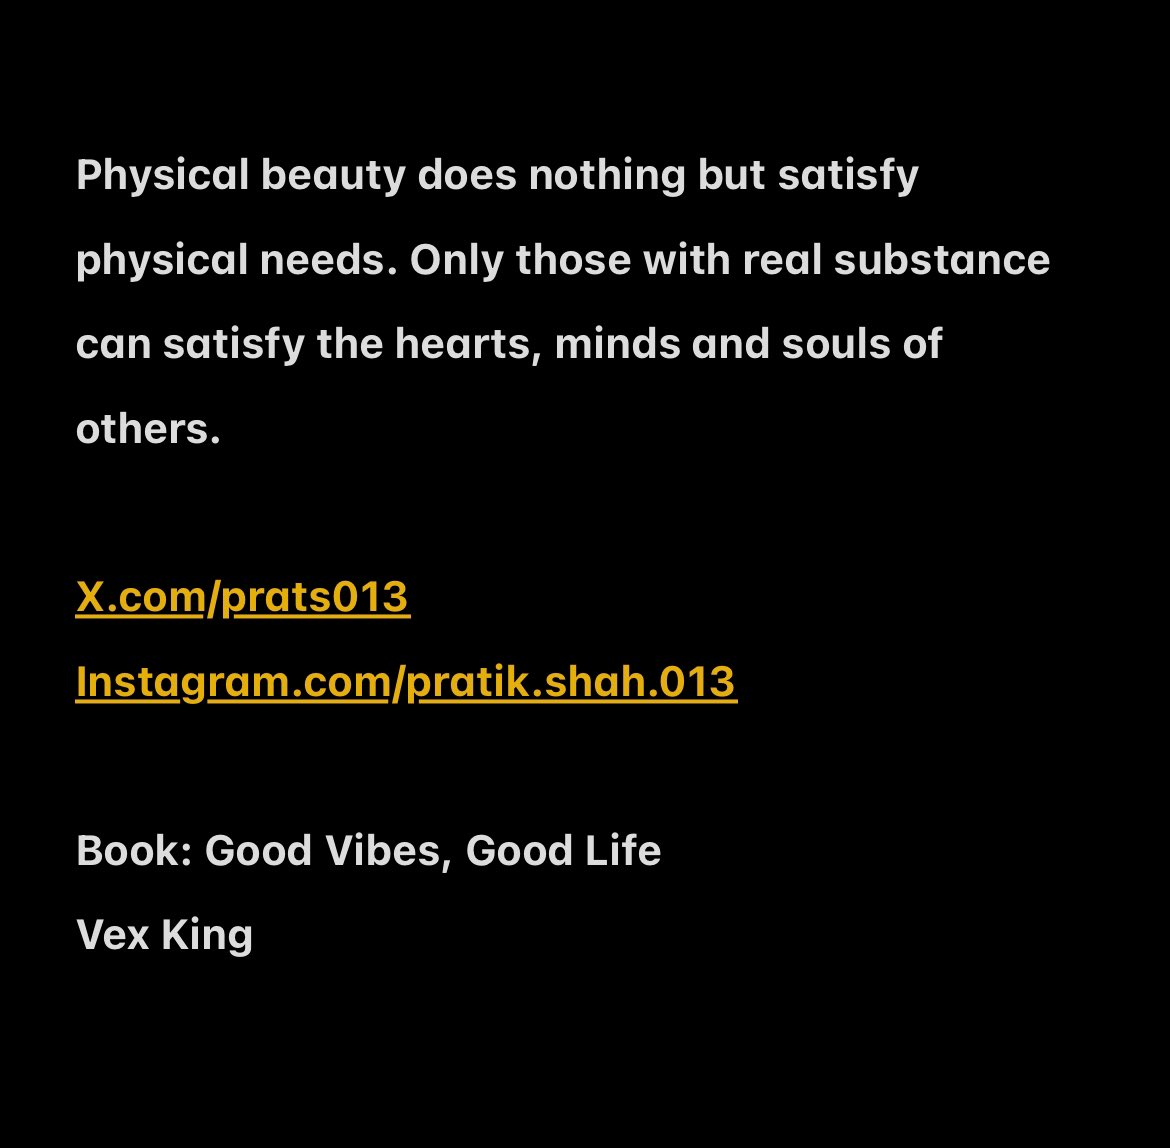 #vexkingbook #vexking #goodvibesgoodlife #books #readingtime #reading #library #wisdom #learning #knowledge  #physical #beauty #satisfy #physical #needs #real #substance #satisfy #hearts #minds #souls #Sunday #readingbooks #morningvibes